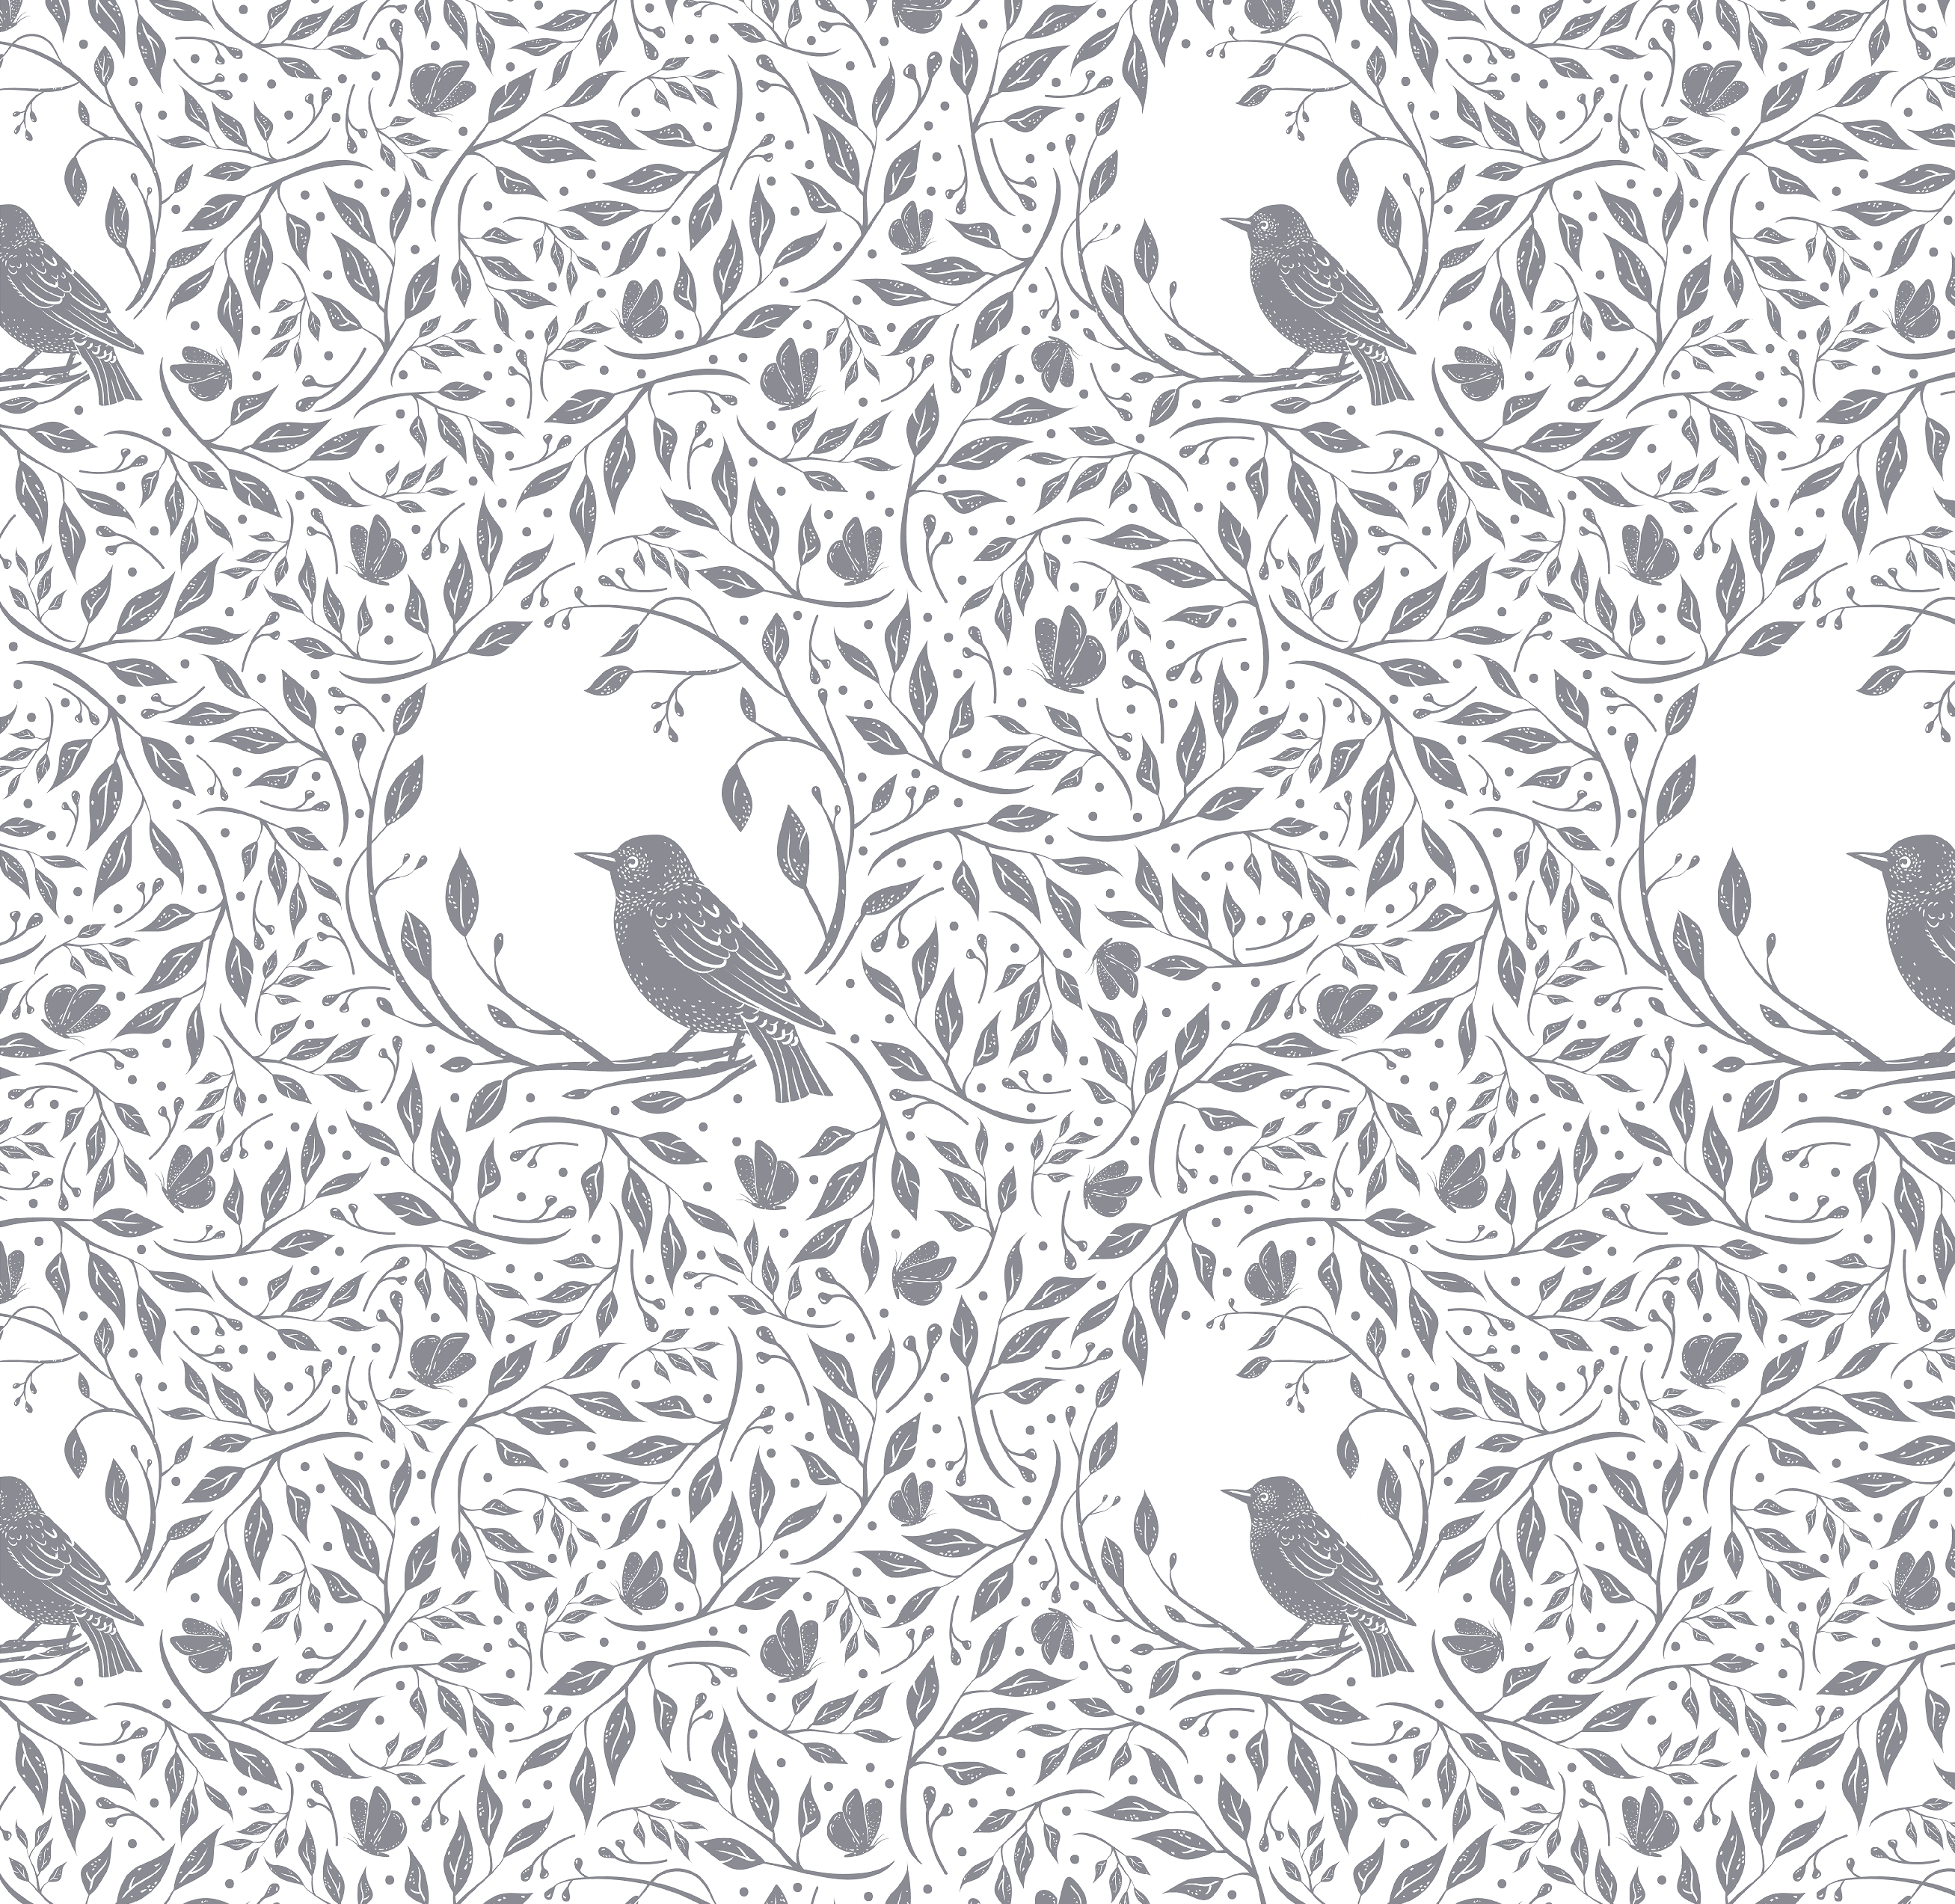 bird wallpaper, removable peel and stick wallpaper, wall paper, wall paper peel and stick, wallpapers peel and stick